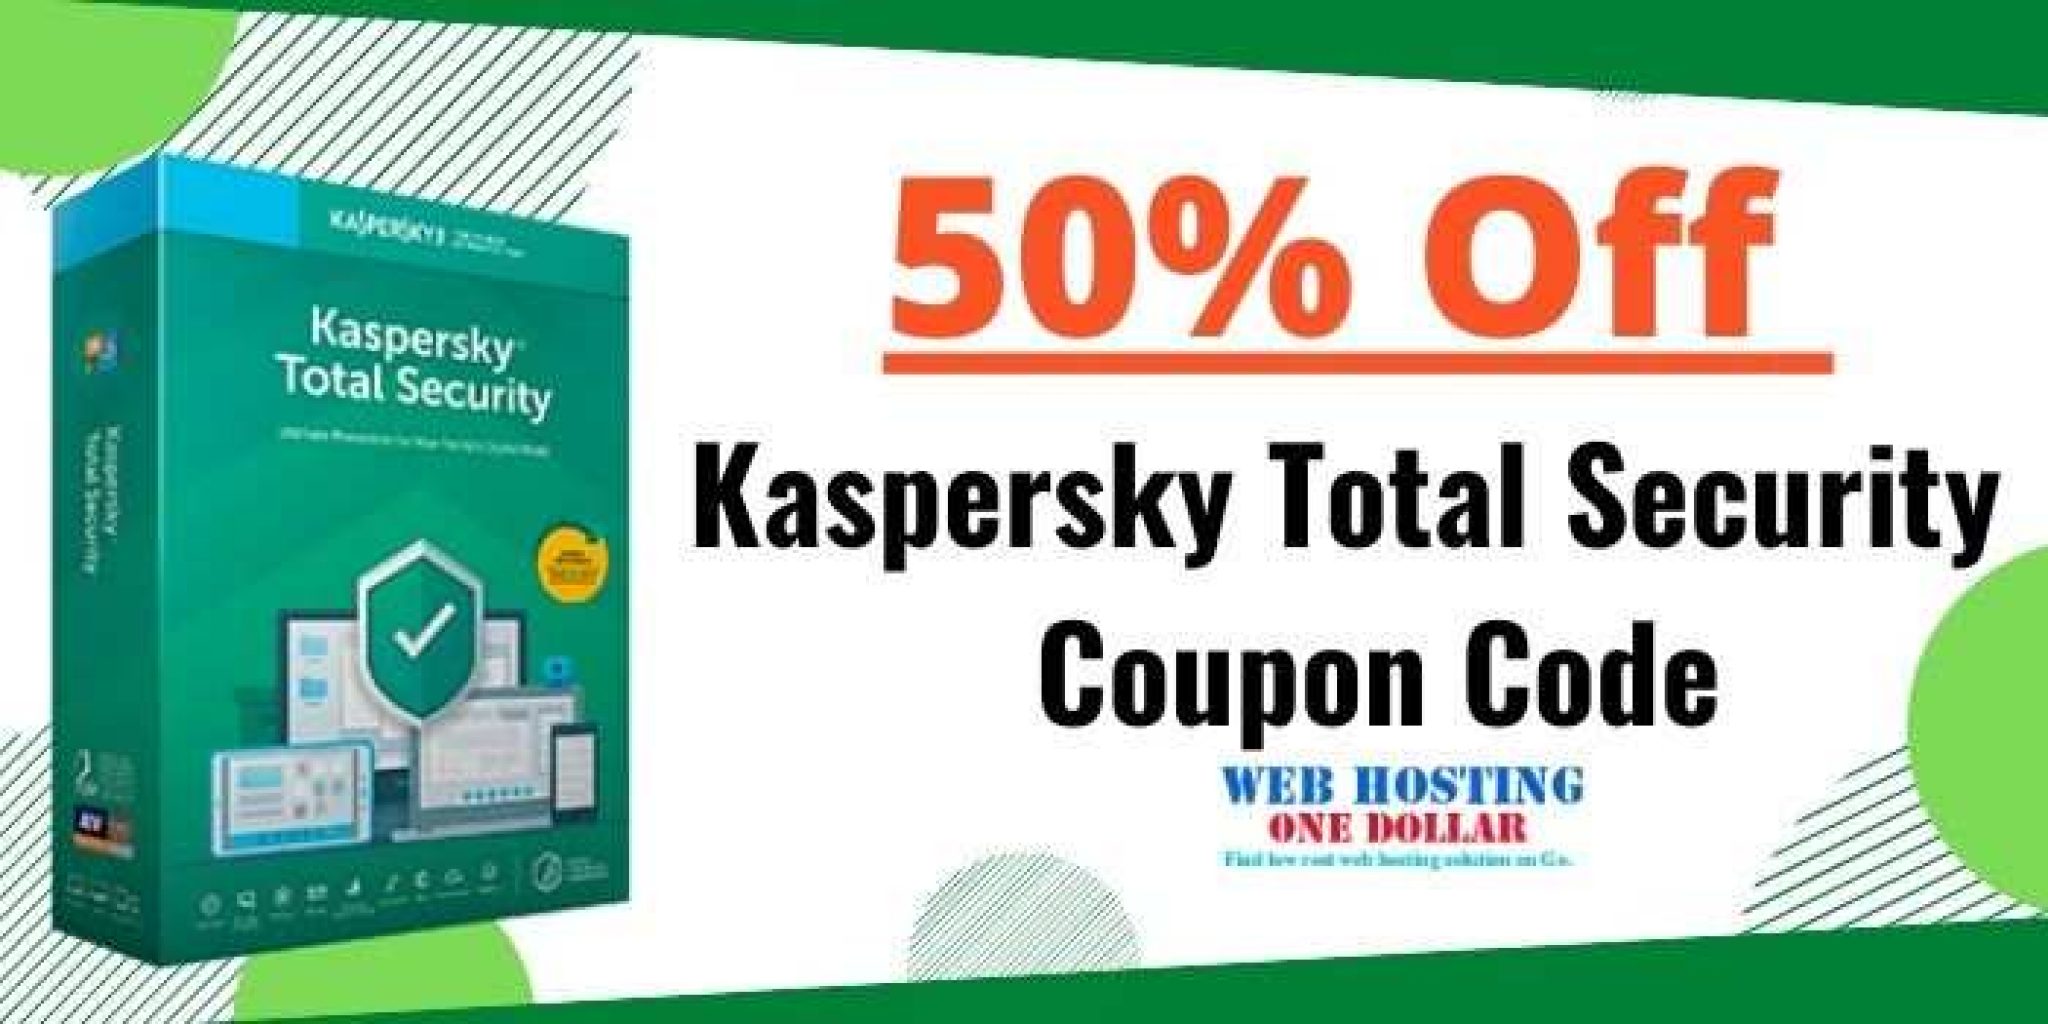 kaspersky discount coupon